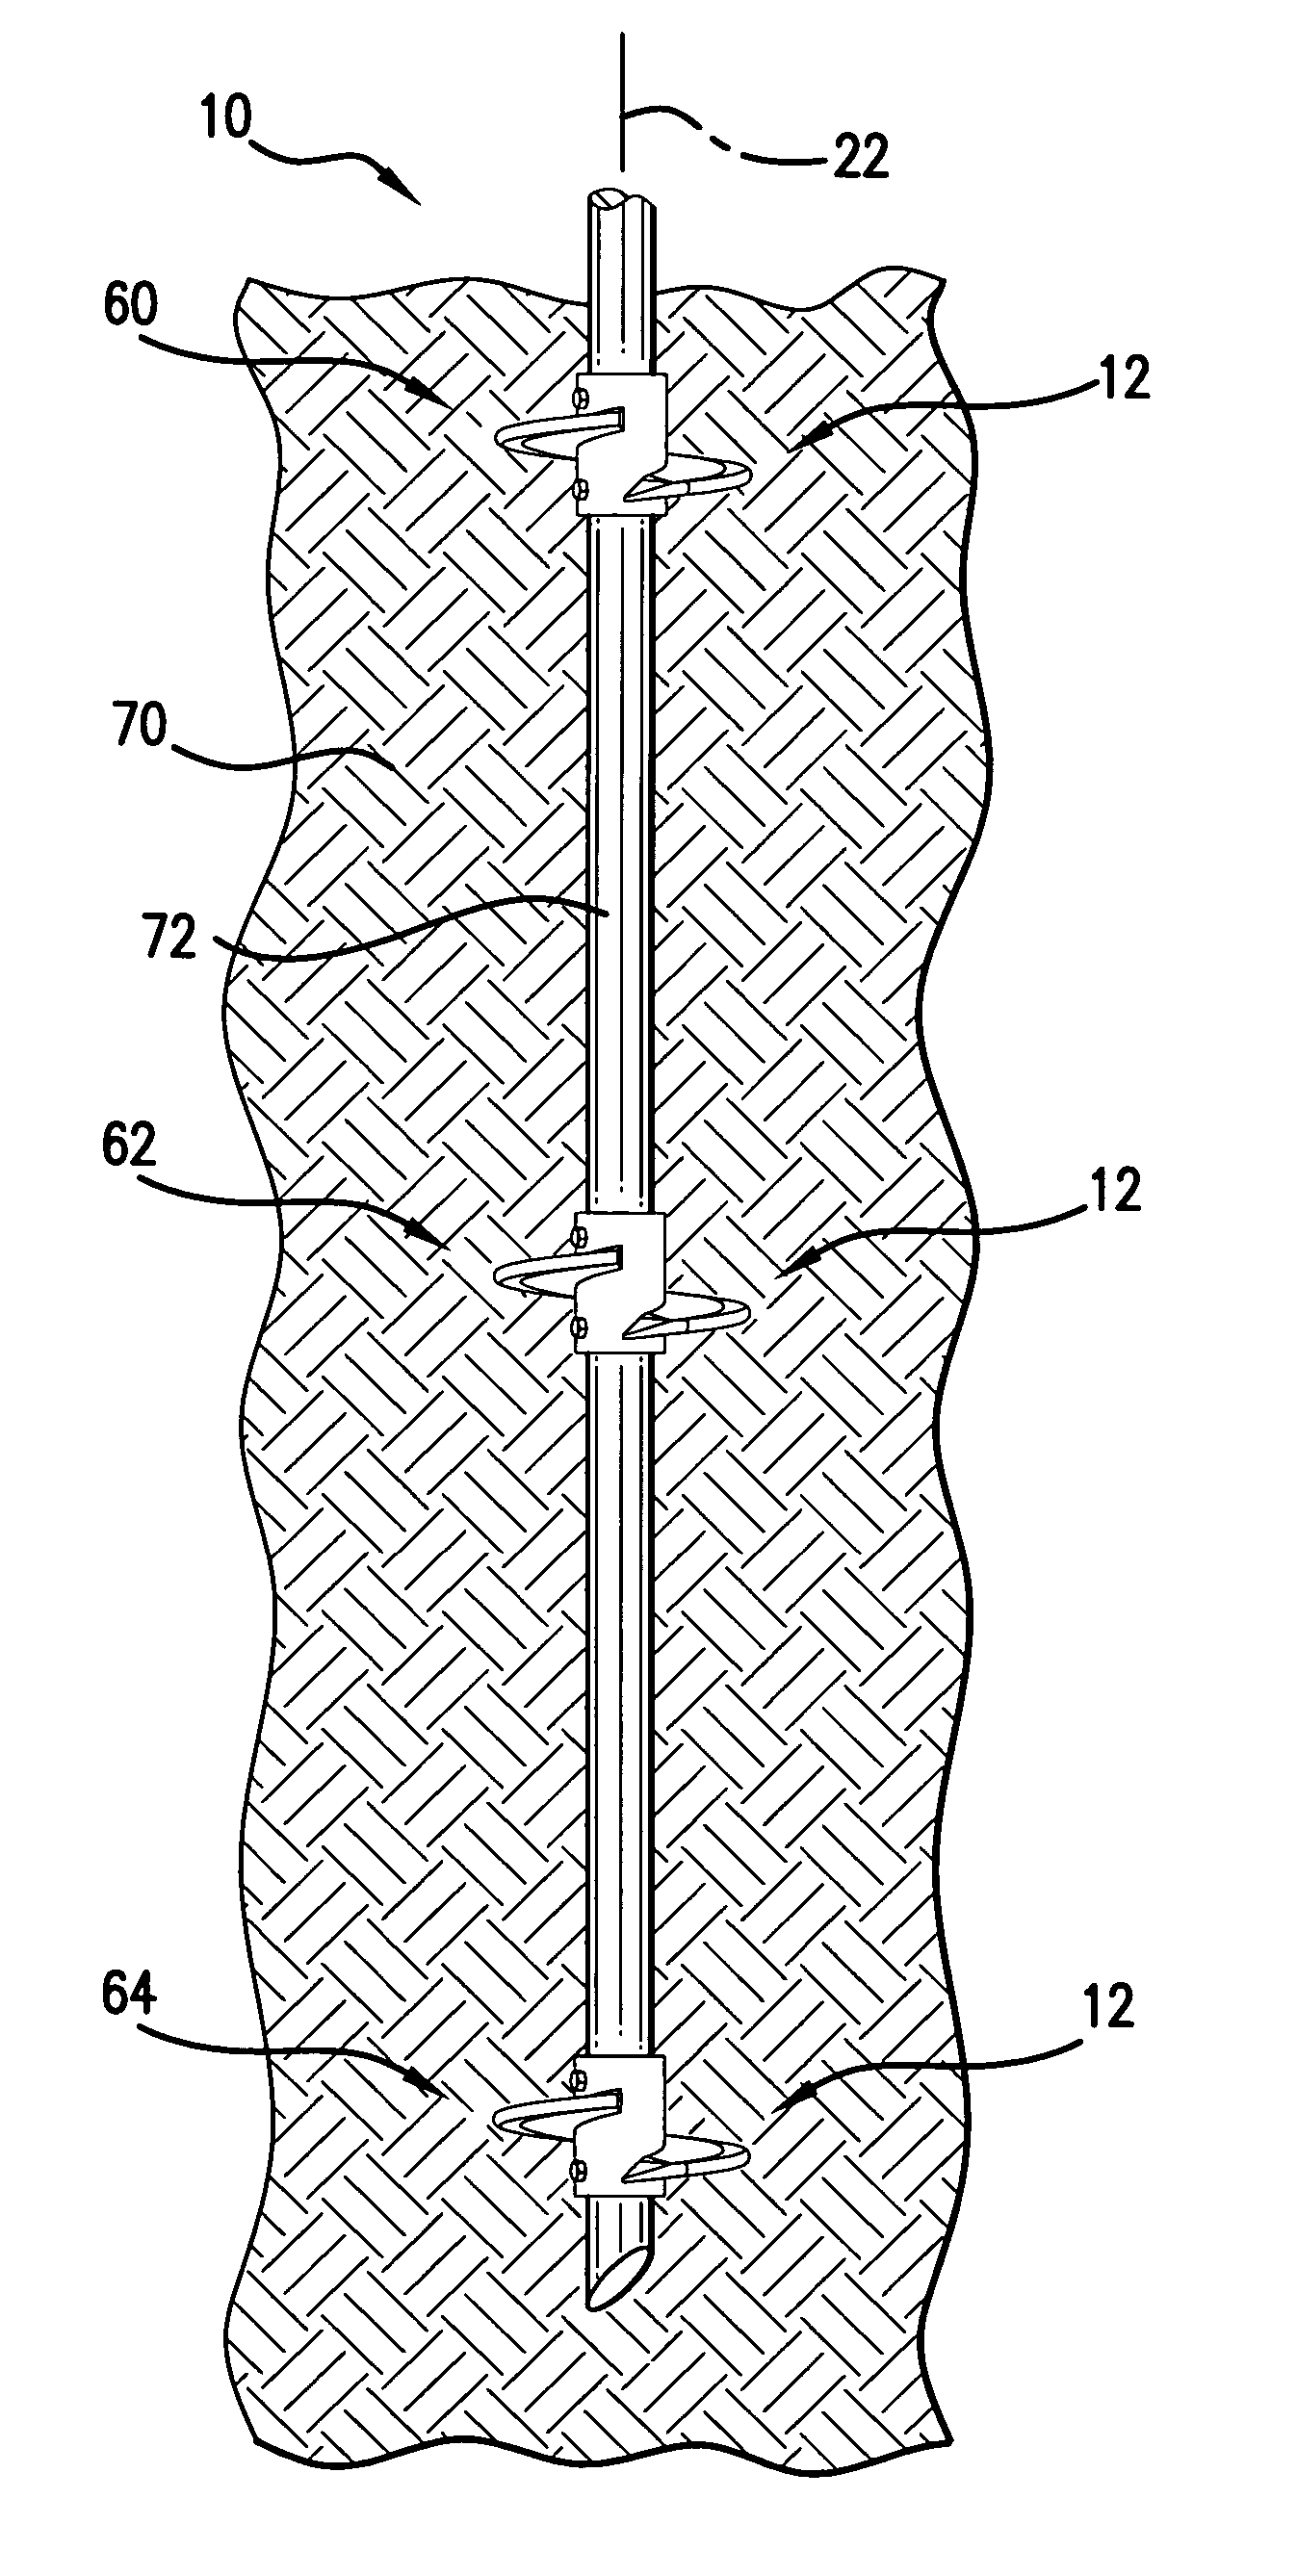 Bearing plate for use in an anchor assembly and related method